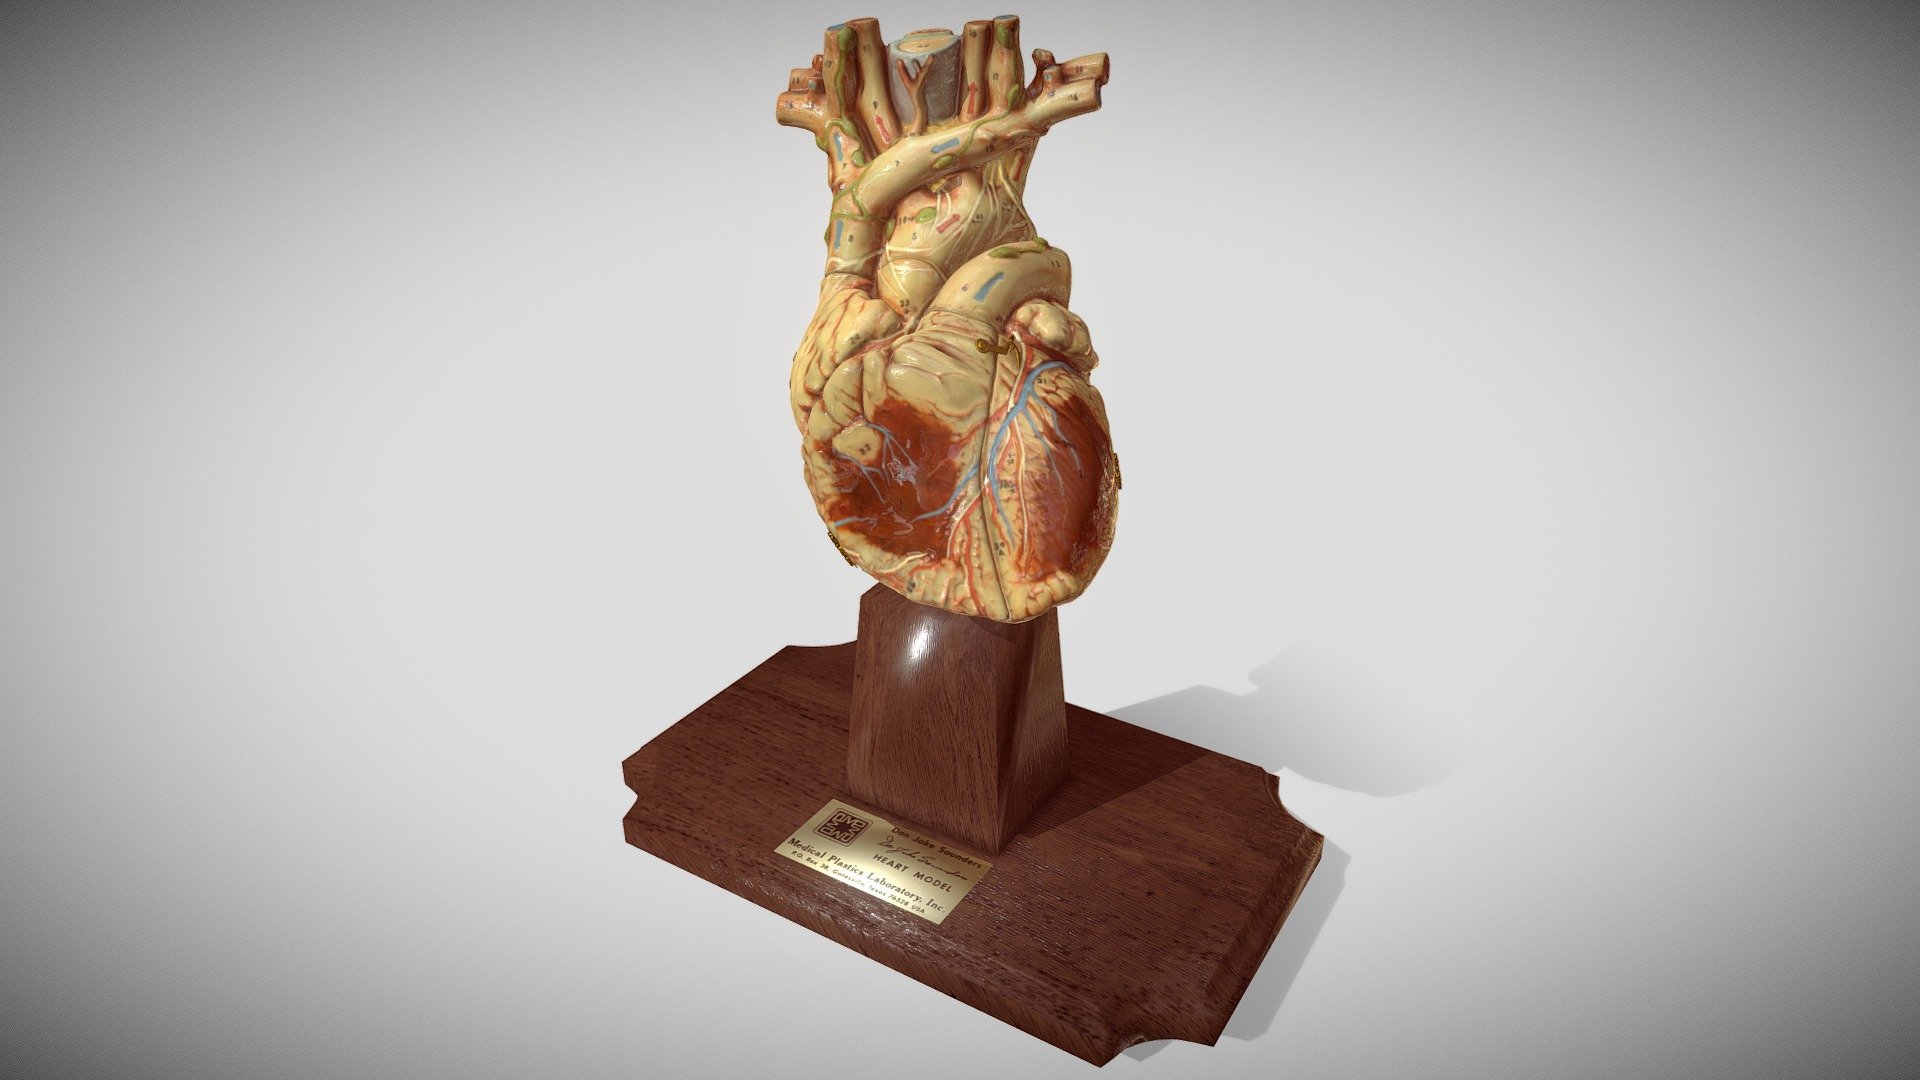 The Don Jake Saunders Heart Model
©1976 Medical Plastics Laboratories, Inc.
Gatesville, Texas (now https://laerdal.com/)

Digitized by CWPrice and JNelson in 2022 - Center for BioMedical Visualization, Department of Anatomical Sciences, St. George's University School of Medicine, Grenada, West Indies.

Created using a variety of workflows and techniques, including 3D scans by the Artec Space Spider, sculpting/painting in ZBrush, and animation in Cinema 4D. The final result is dedicated to the students/faculty of SGU, who have studied from the real thing in the cadaver labs for over 40 years.

Use the drop down menu (bottom of the screen) to set the model to static and animated poses or select annotation arrows for an animated tour.

Click here for a .pdf of the original instructional guide, including a description of numbered structures, courtesy of Creighton University. 
For Educational Use Only! - Antique Heart Model for Studying - 3D model by The Center for BioMedical Visualization at SGU (@SGUMedArt) 3d model